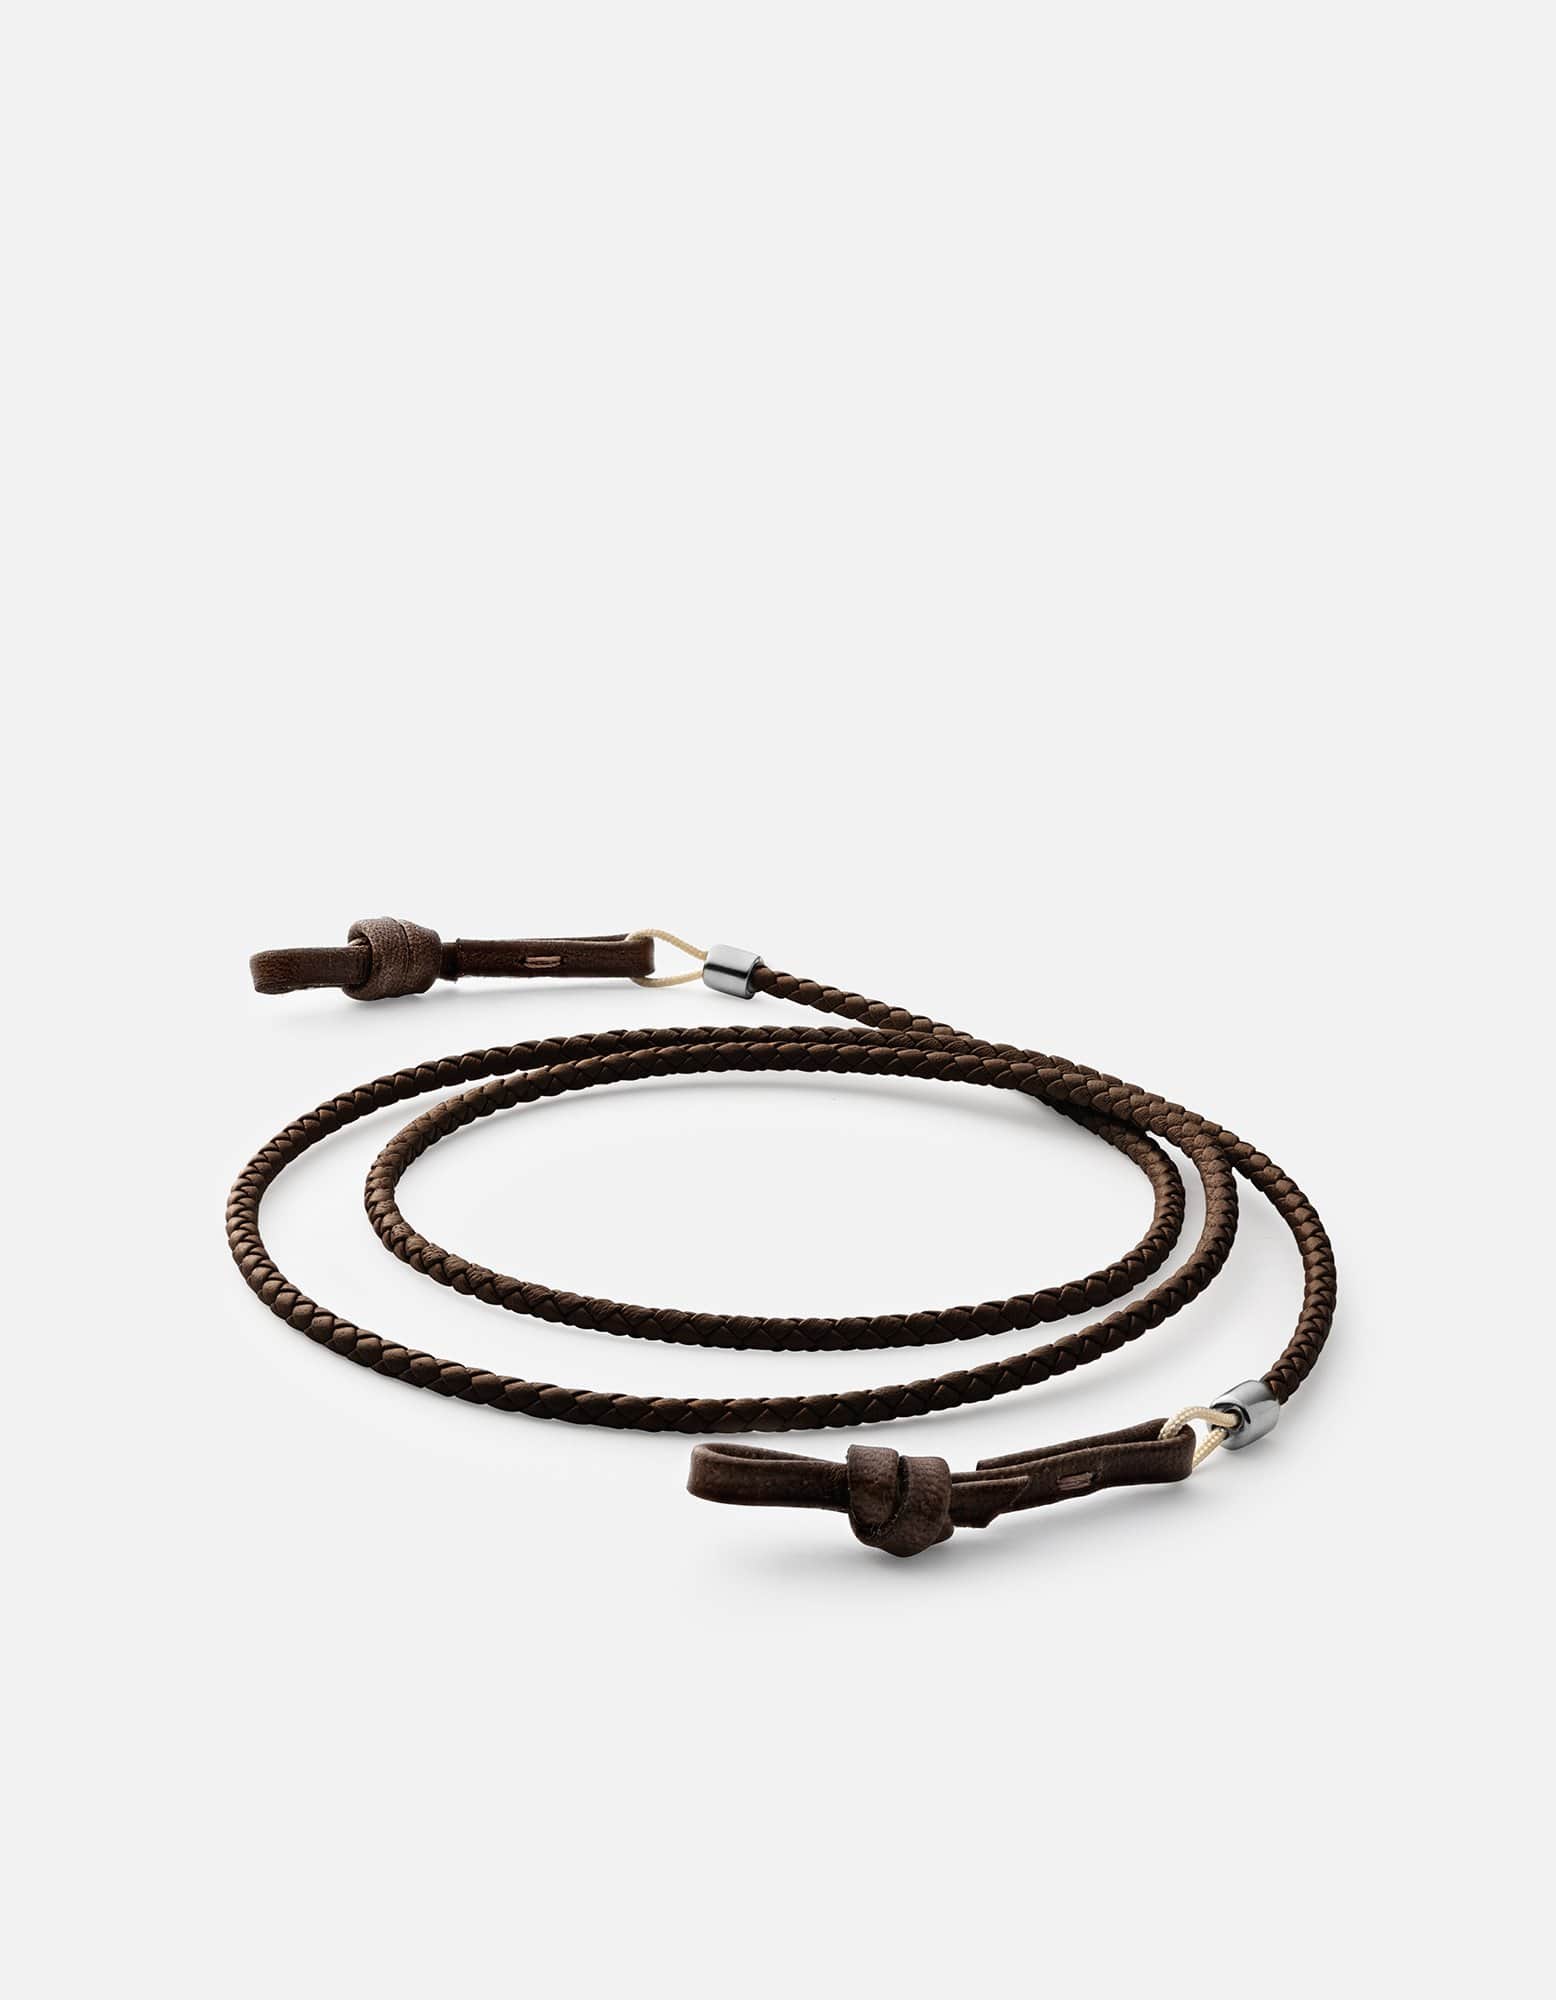 Nexus Braided Leather Sunglass Cord, Sterling Silver